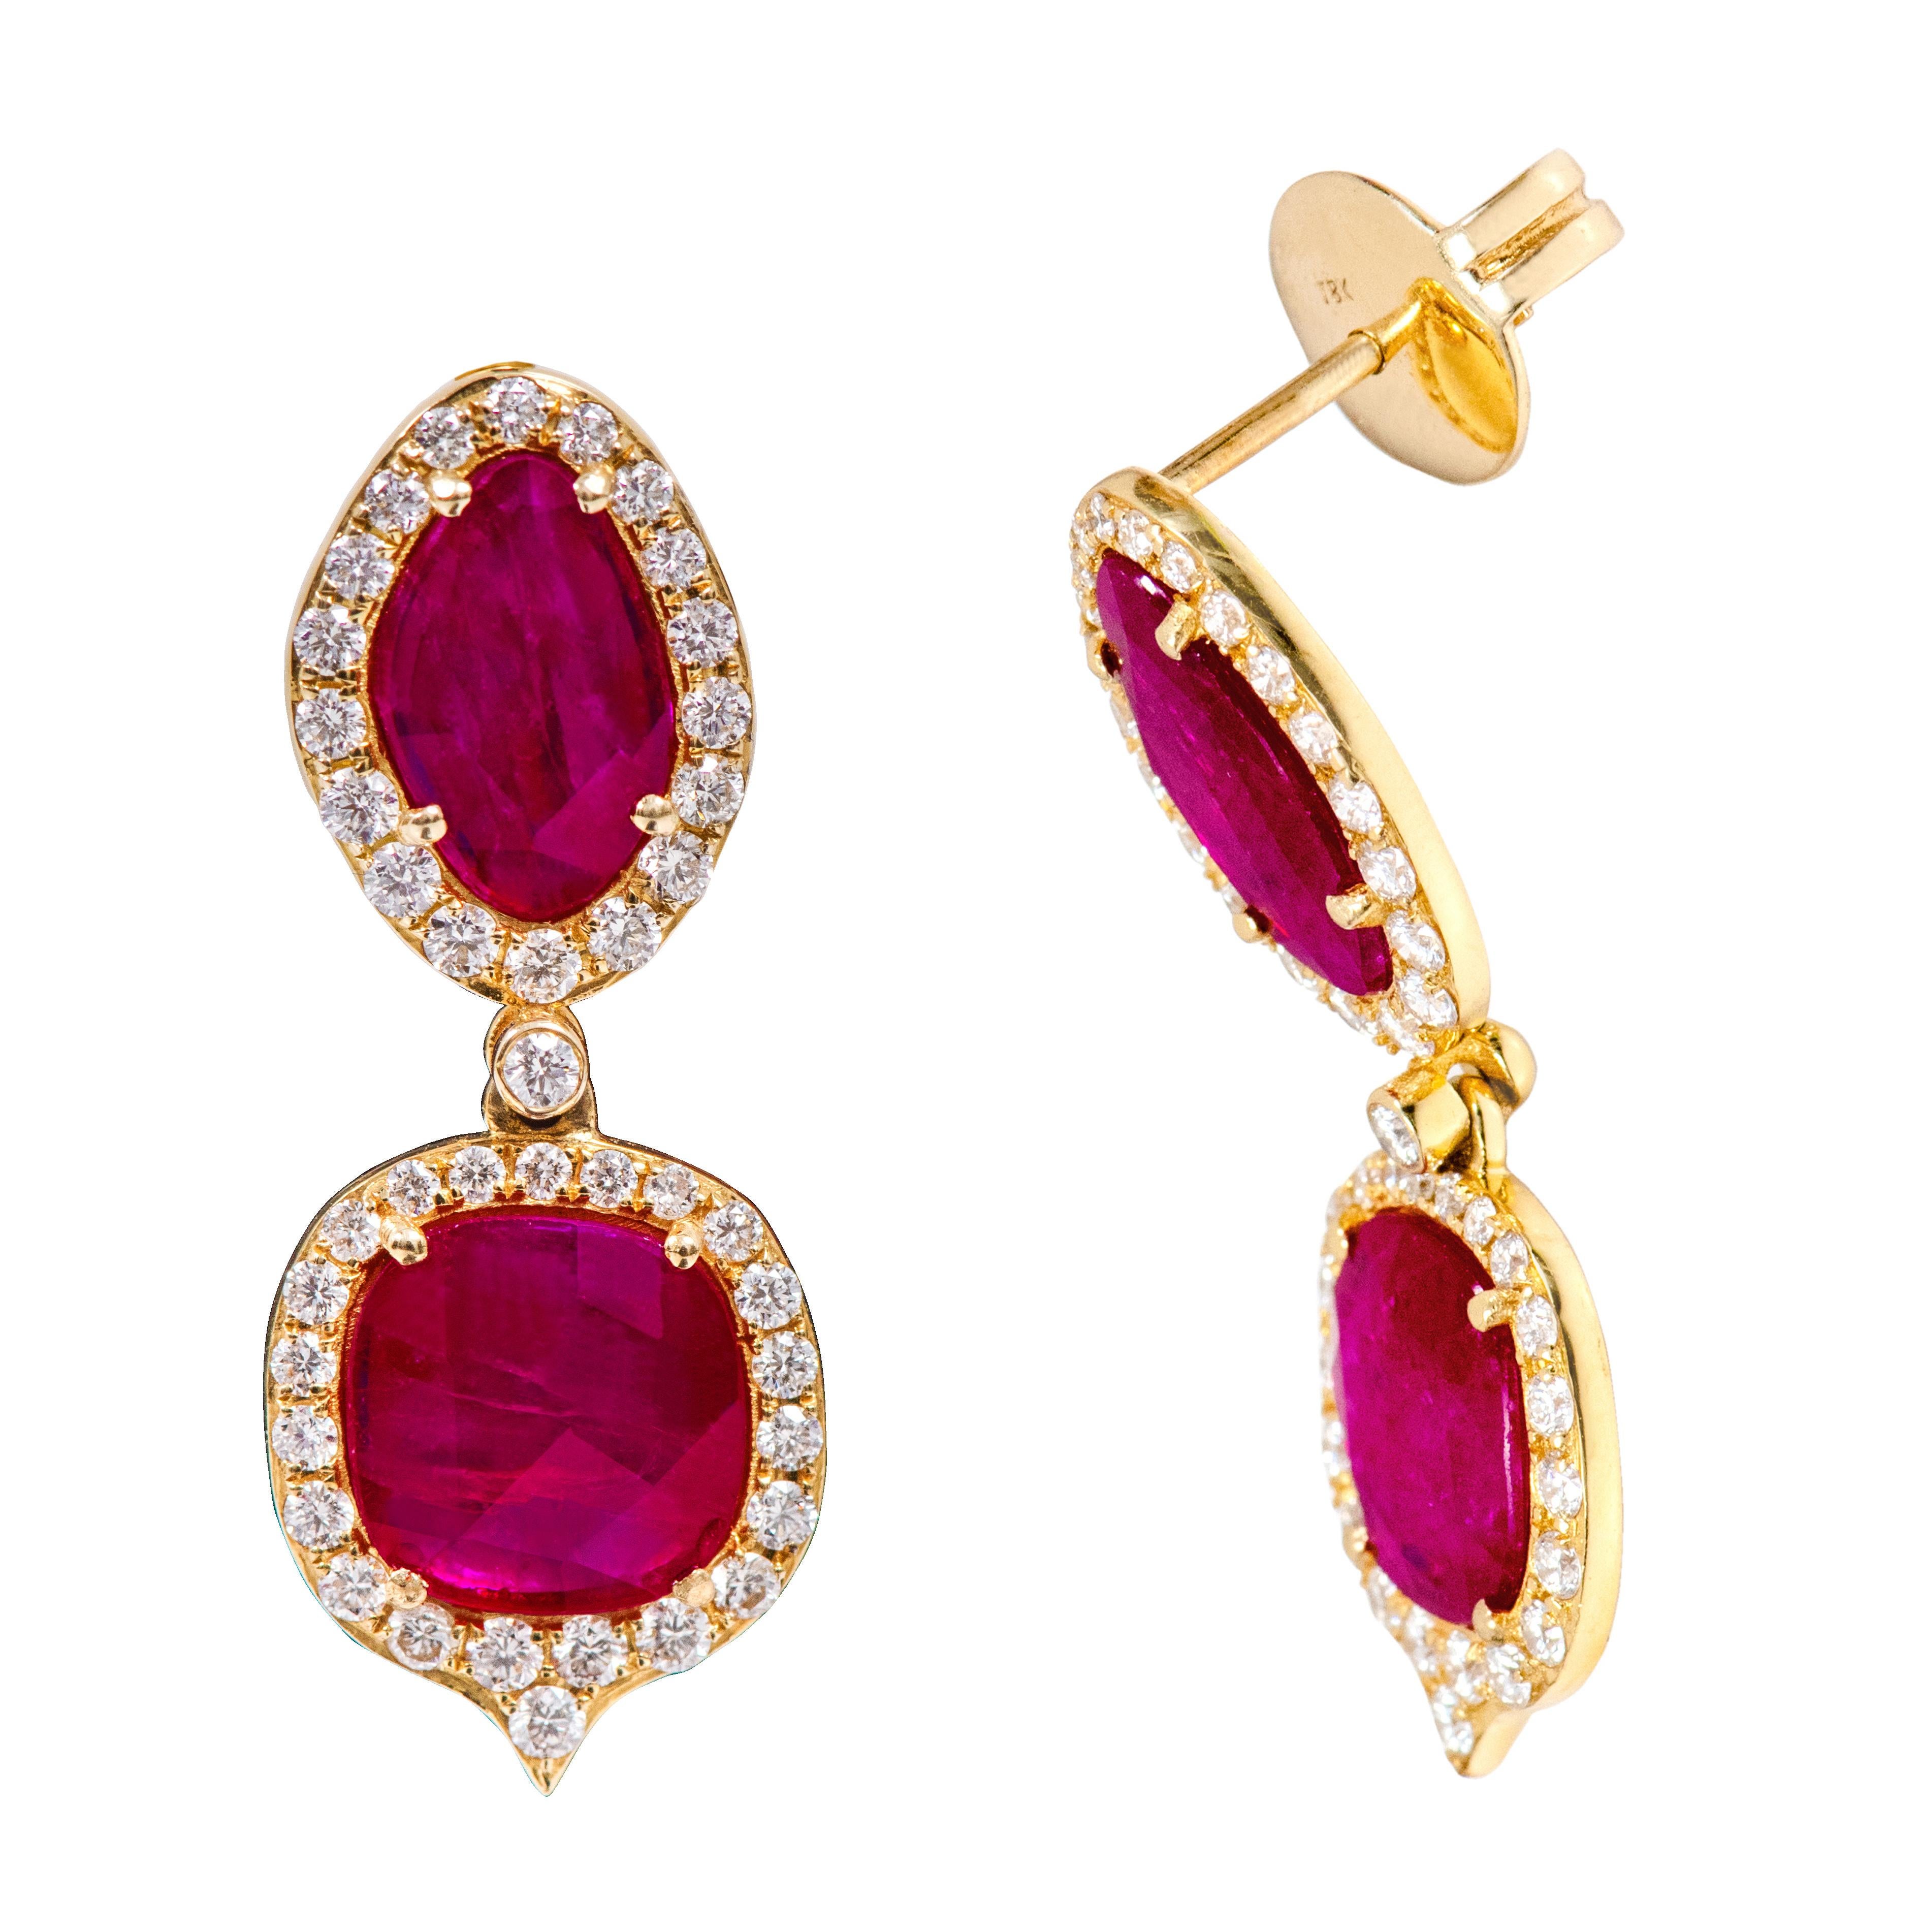 18 Karat Yellow Gold 3.12 Carat Ruby and Diamond Drop Earrings

This unusually cool and magical wine-red oddly sliced cut ruby earring is riveting. It’s made with the uniquely faceted uneven slice red ruby cut with the marquise-oval shape on the